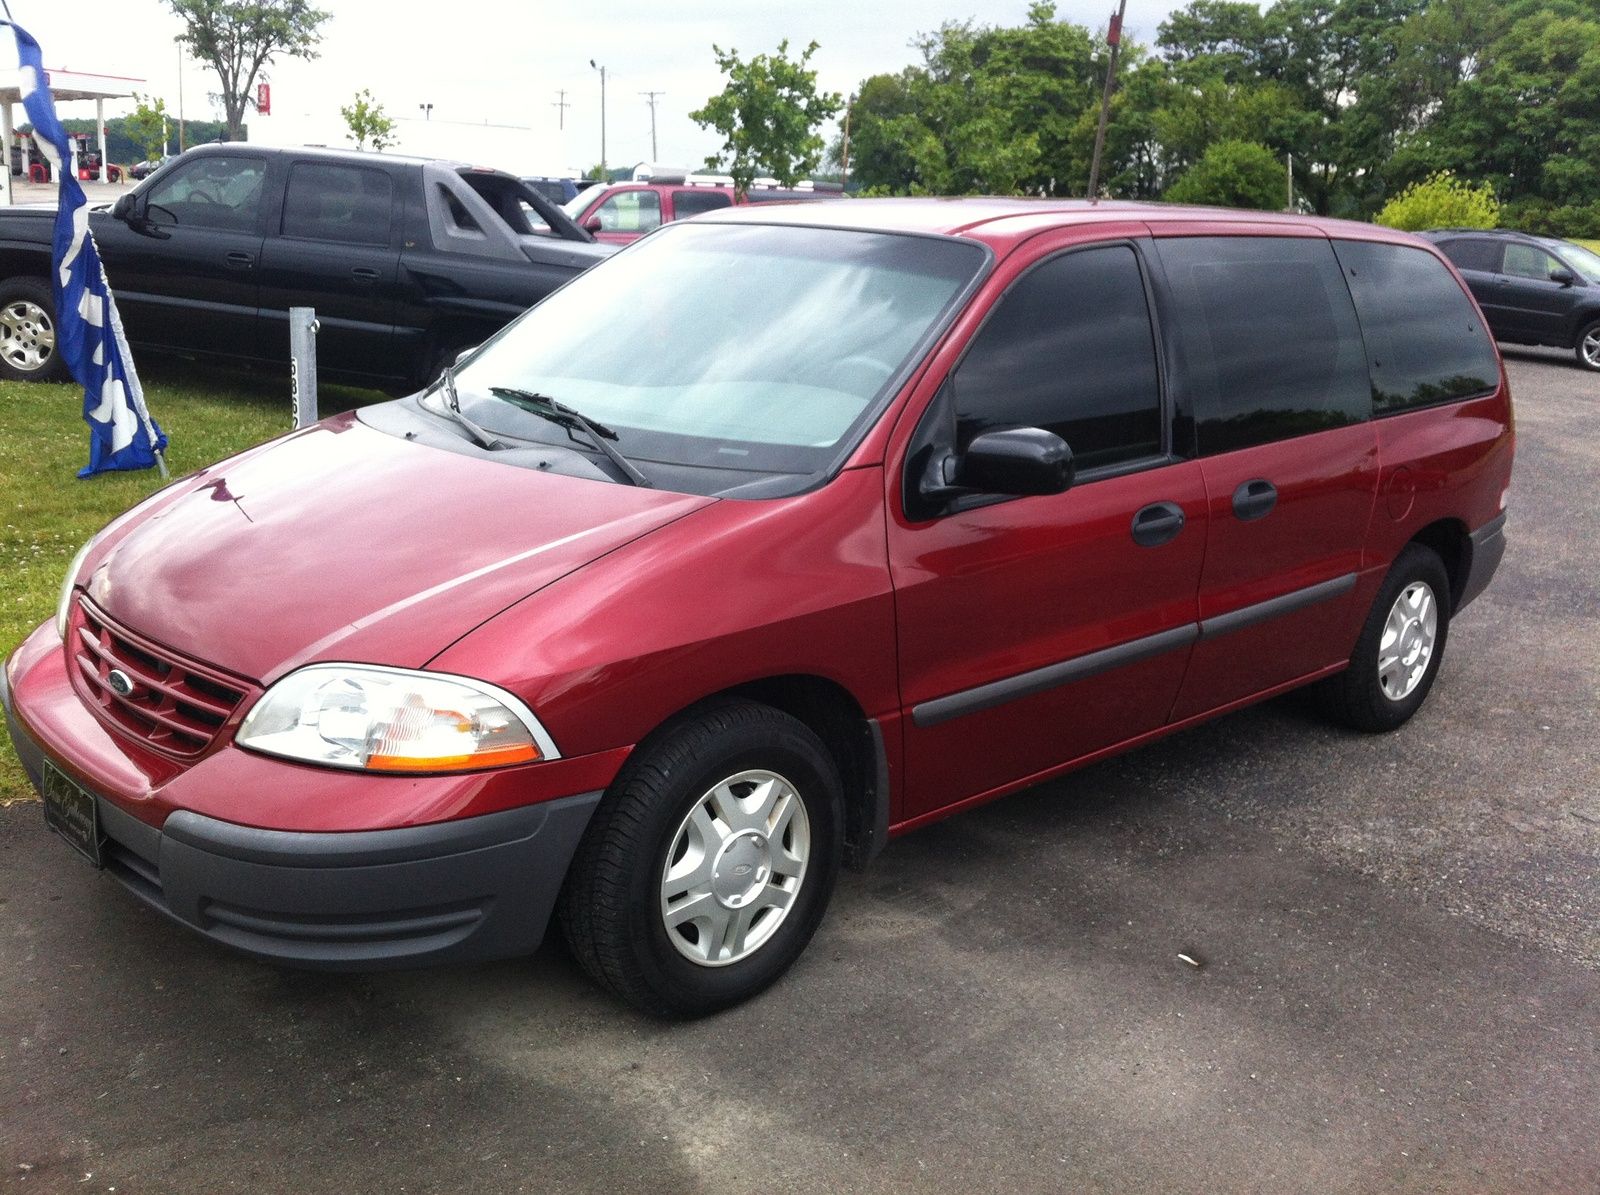 2003 Ford Windstar Sport Specs, Colors, 060, 0100